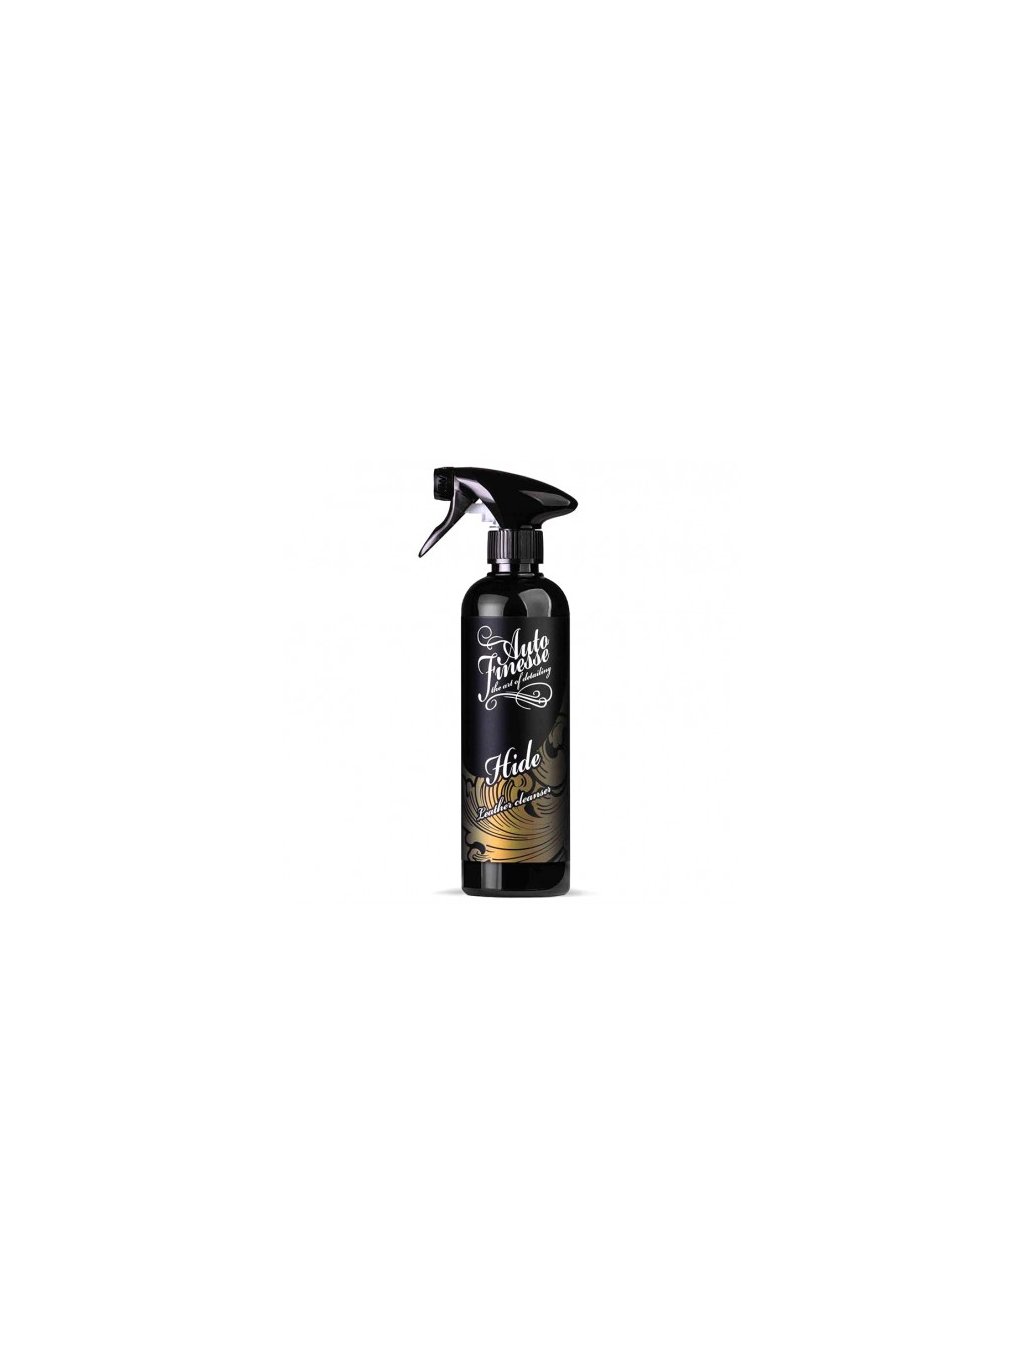 cistic kuze auto finesse hide leather cleanser